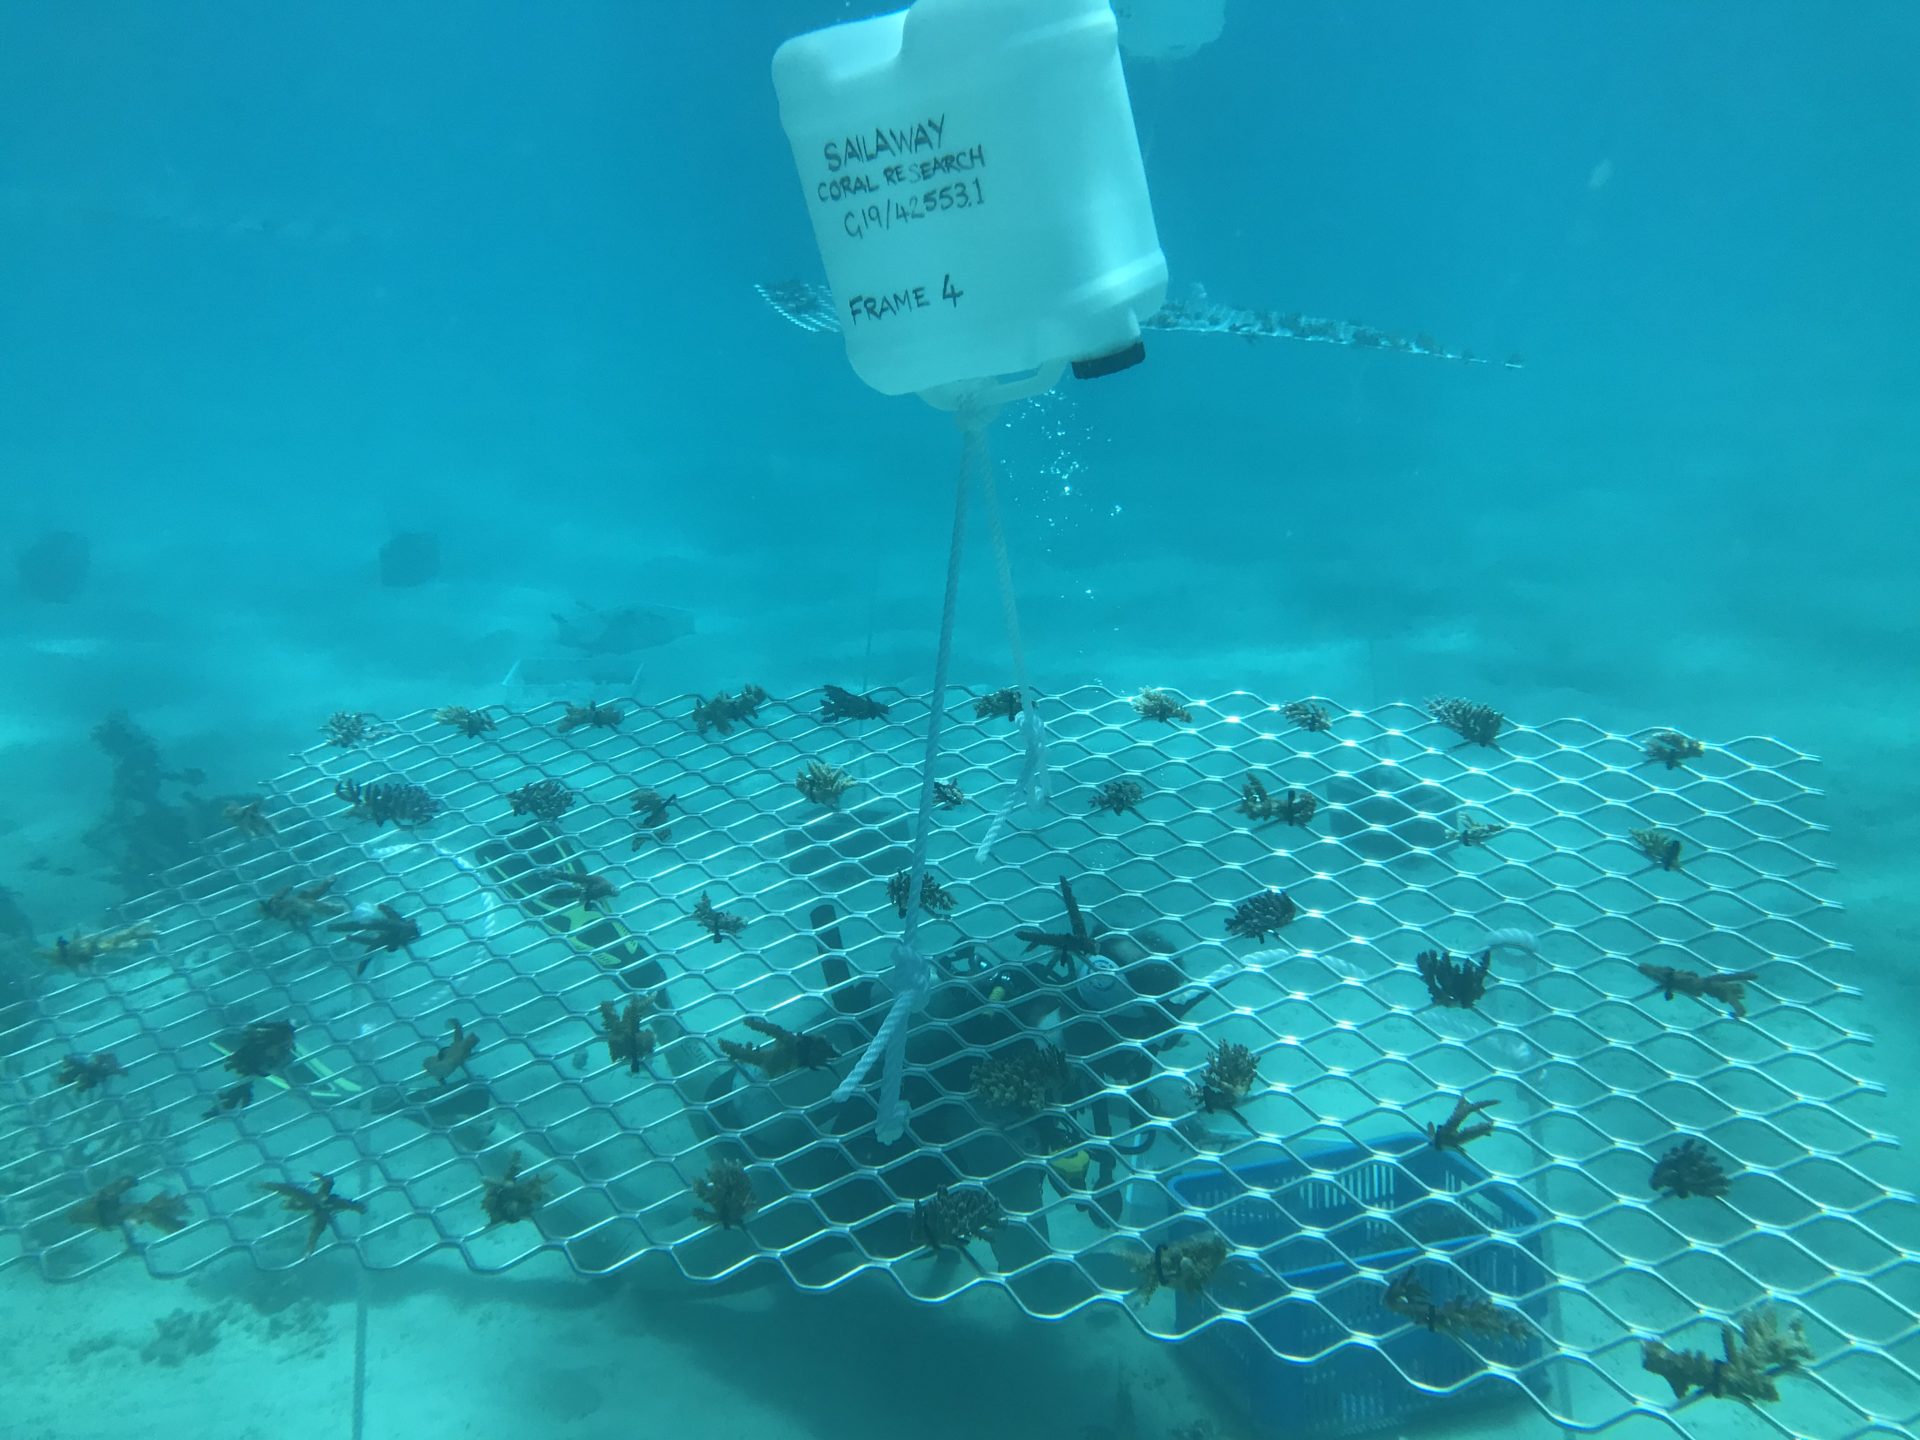 Underwater photo of Frame #4 installation at Mackay Cay on 6 Sep 19